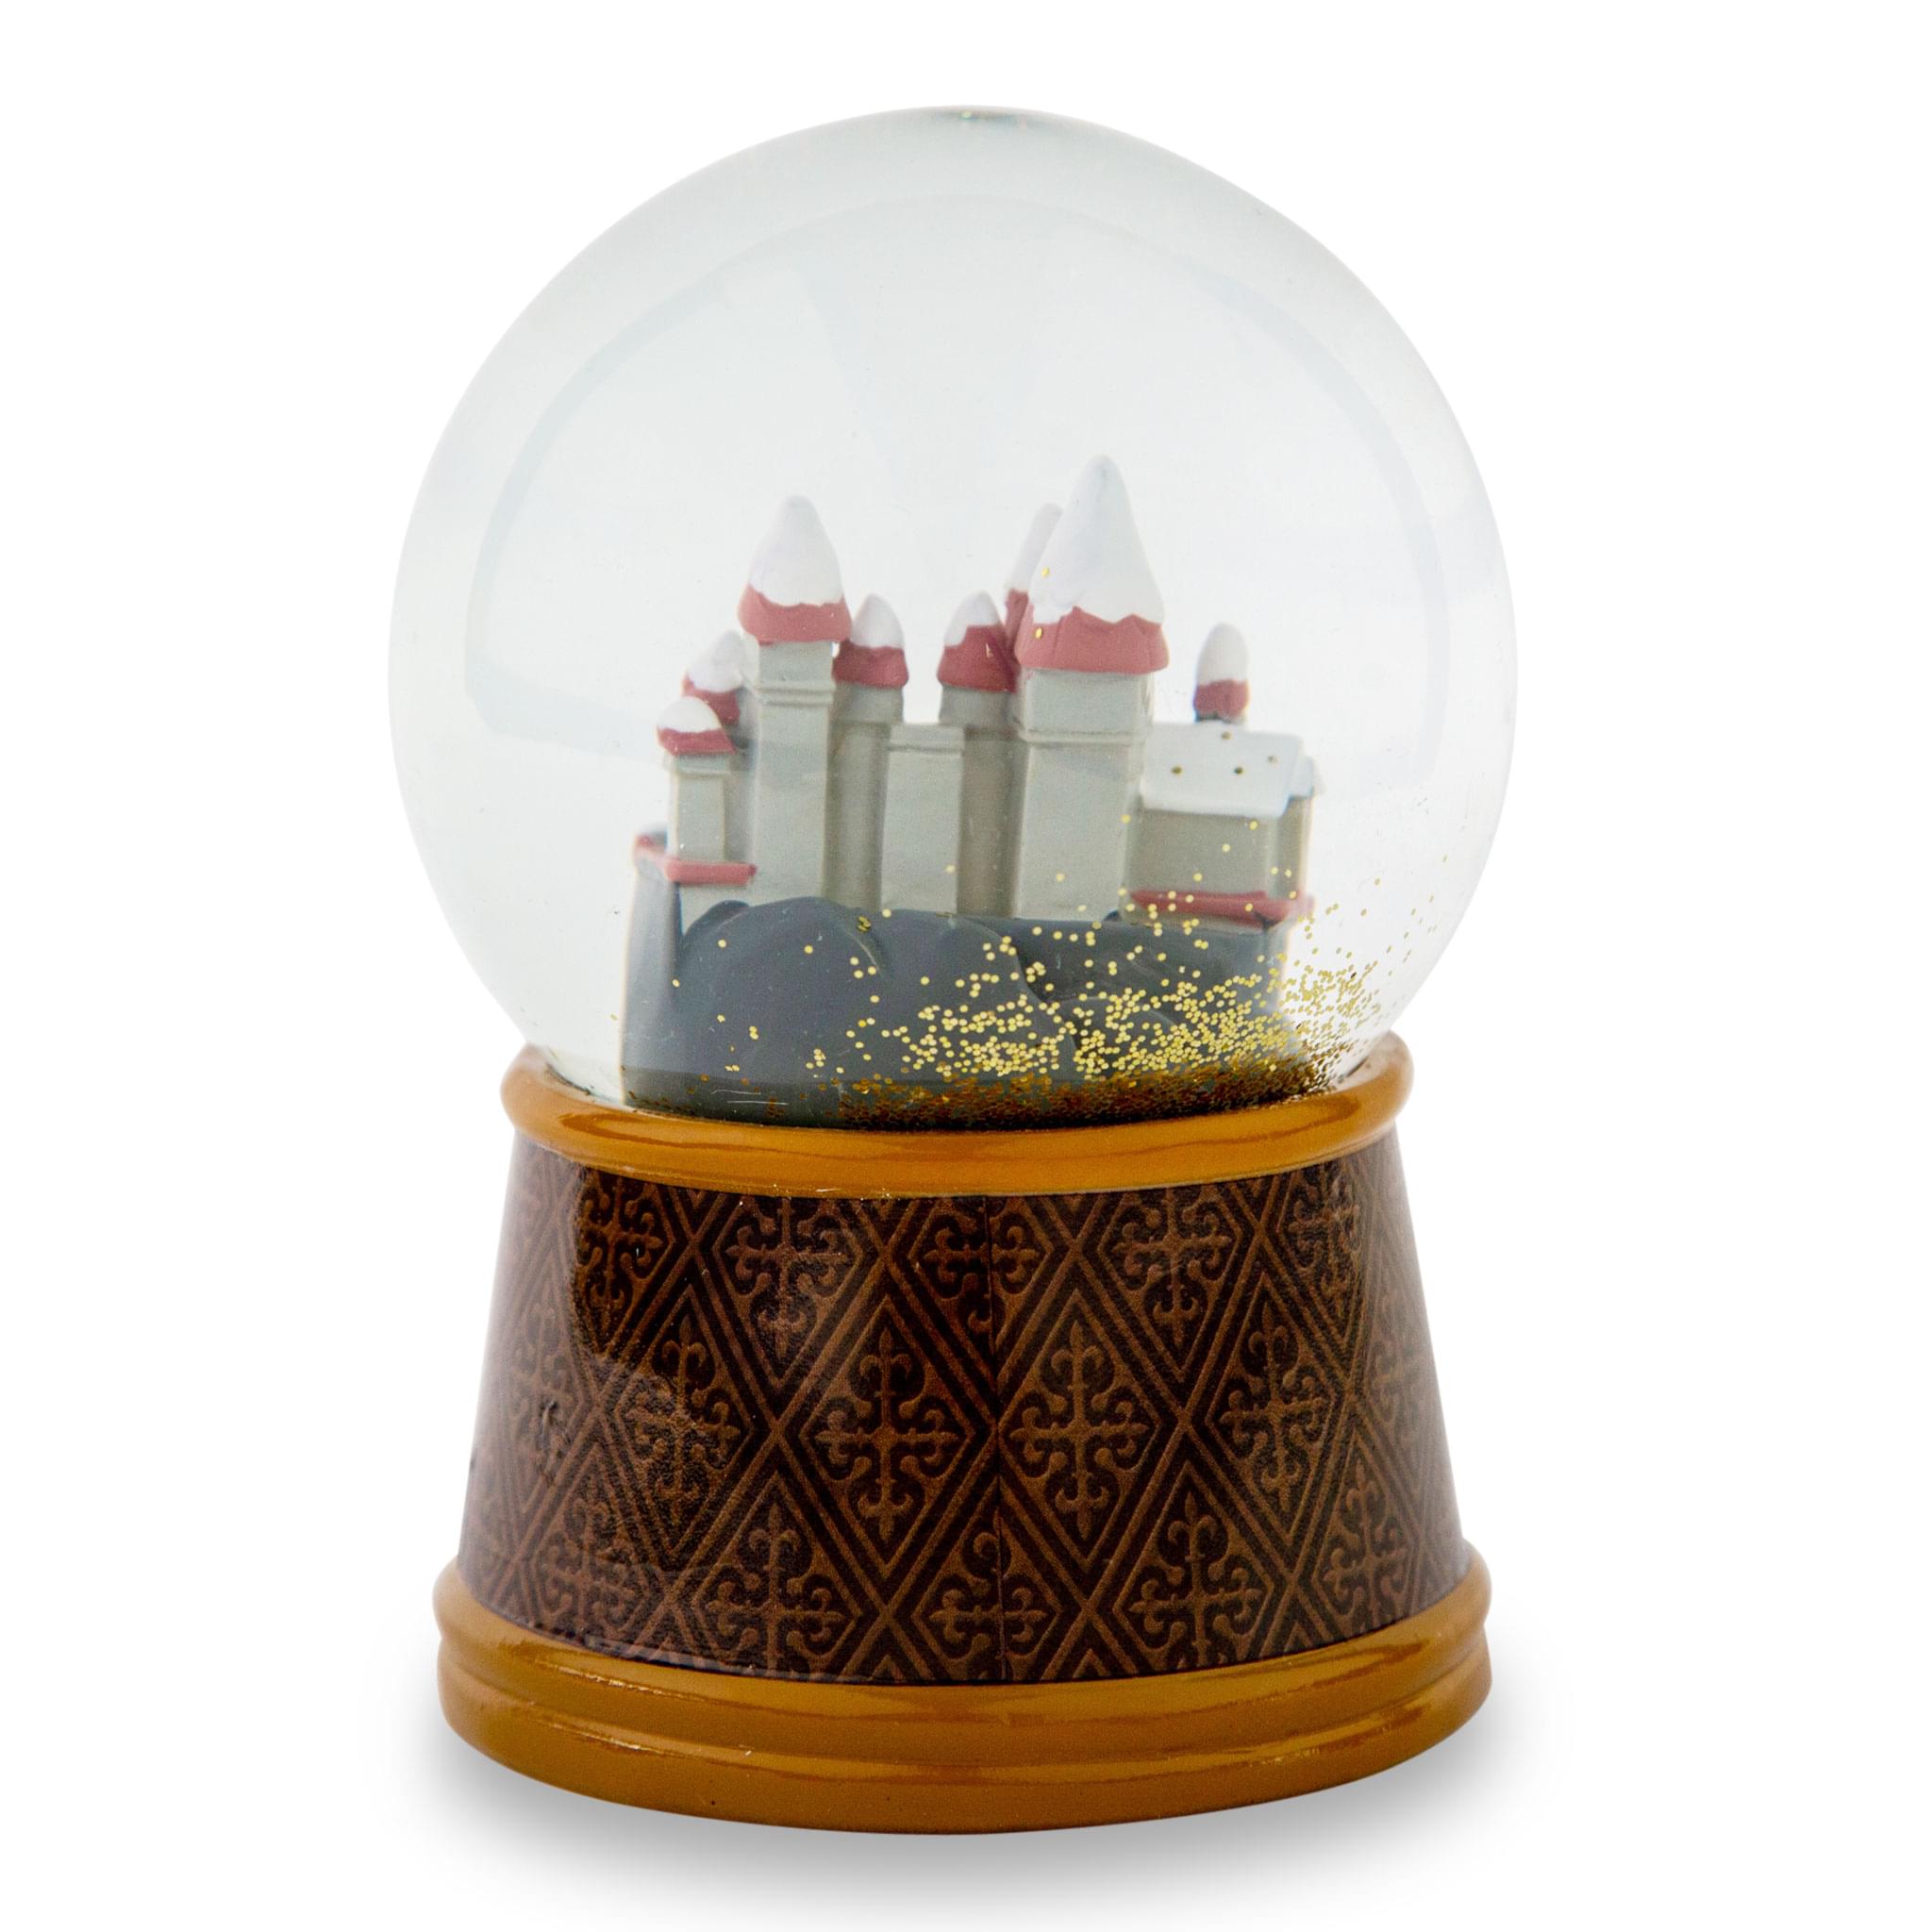 Harry Potter Hogwarts Castle Collectible Snow Globe | 6 Inches Tall - image 2 of 8